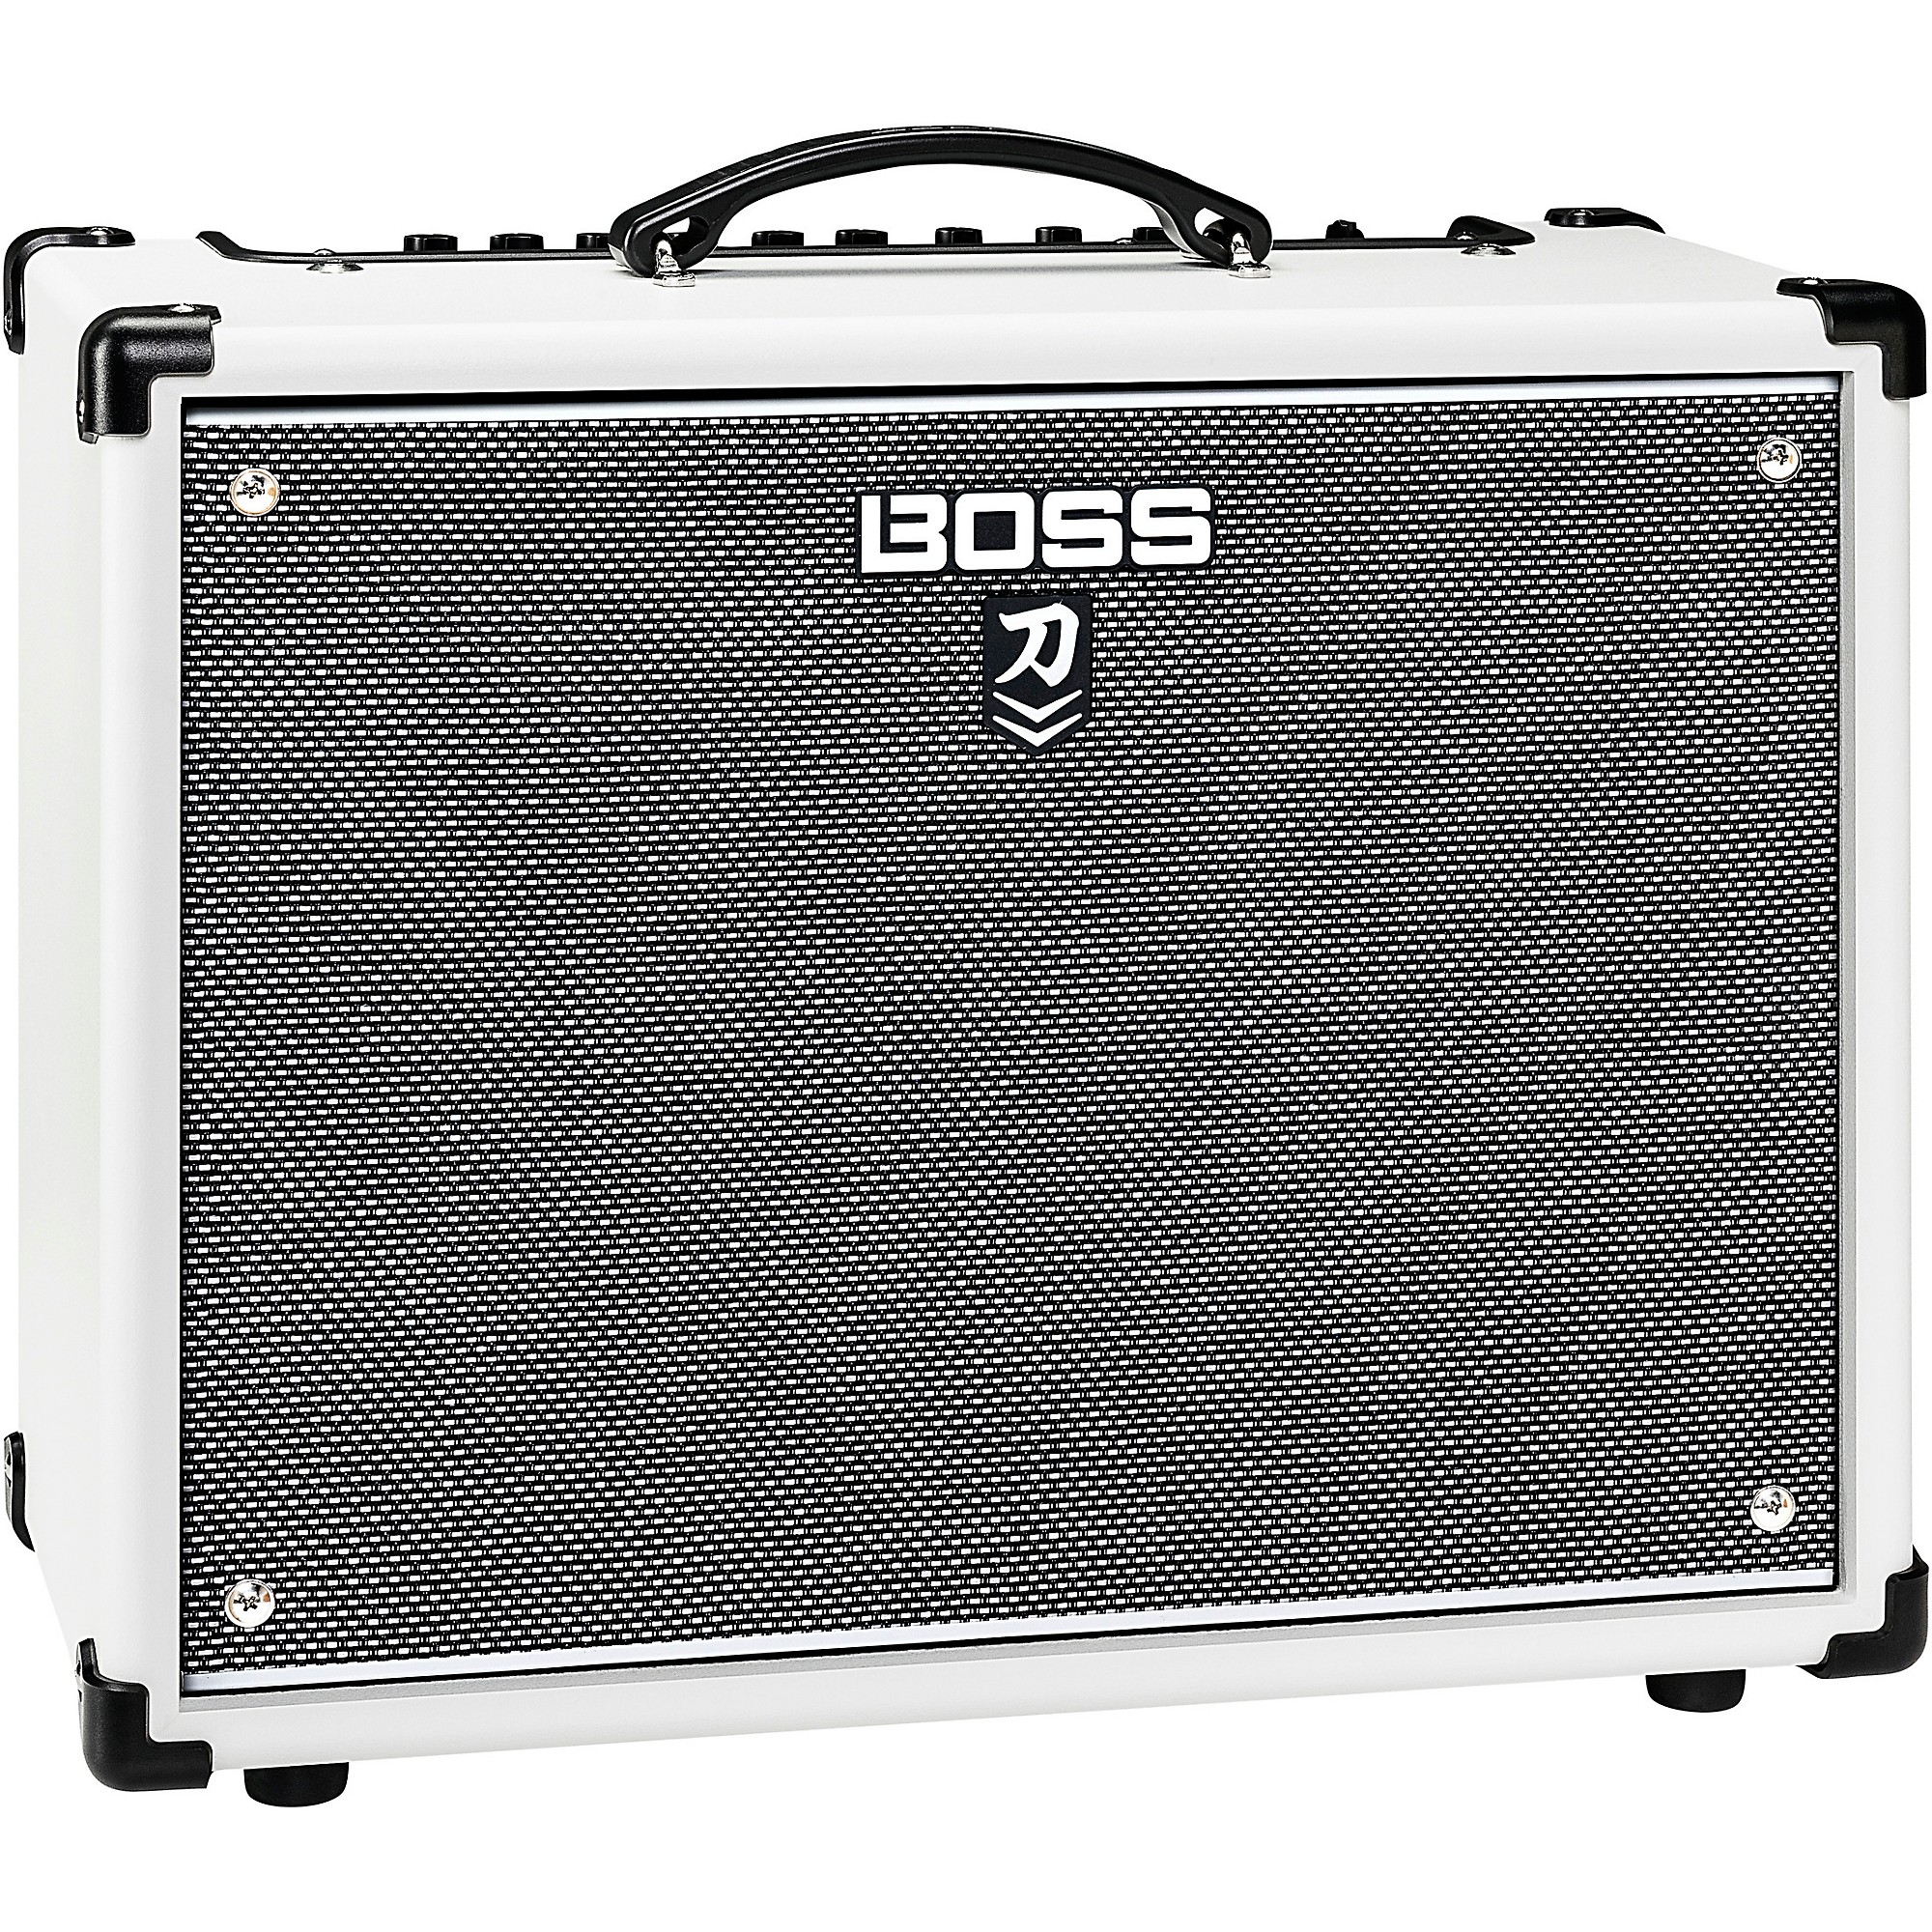 BOSS Limited-Edition Katana KTN-50 MkII 50W 1x12 Gray Grille Cloth Guitar  Combo Amplifier White